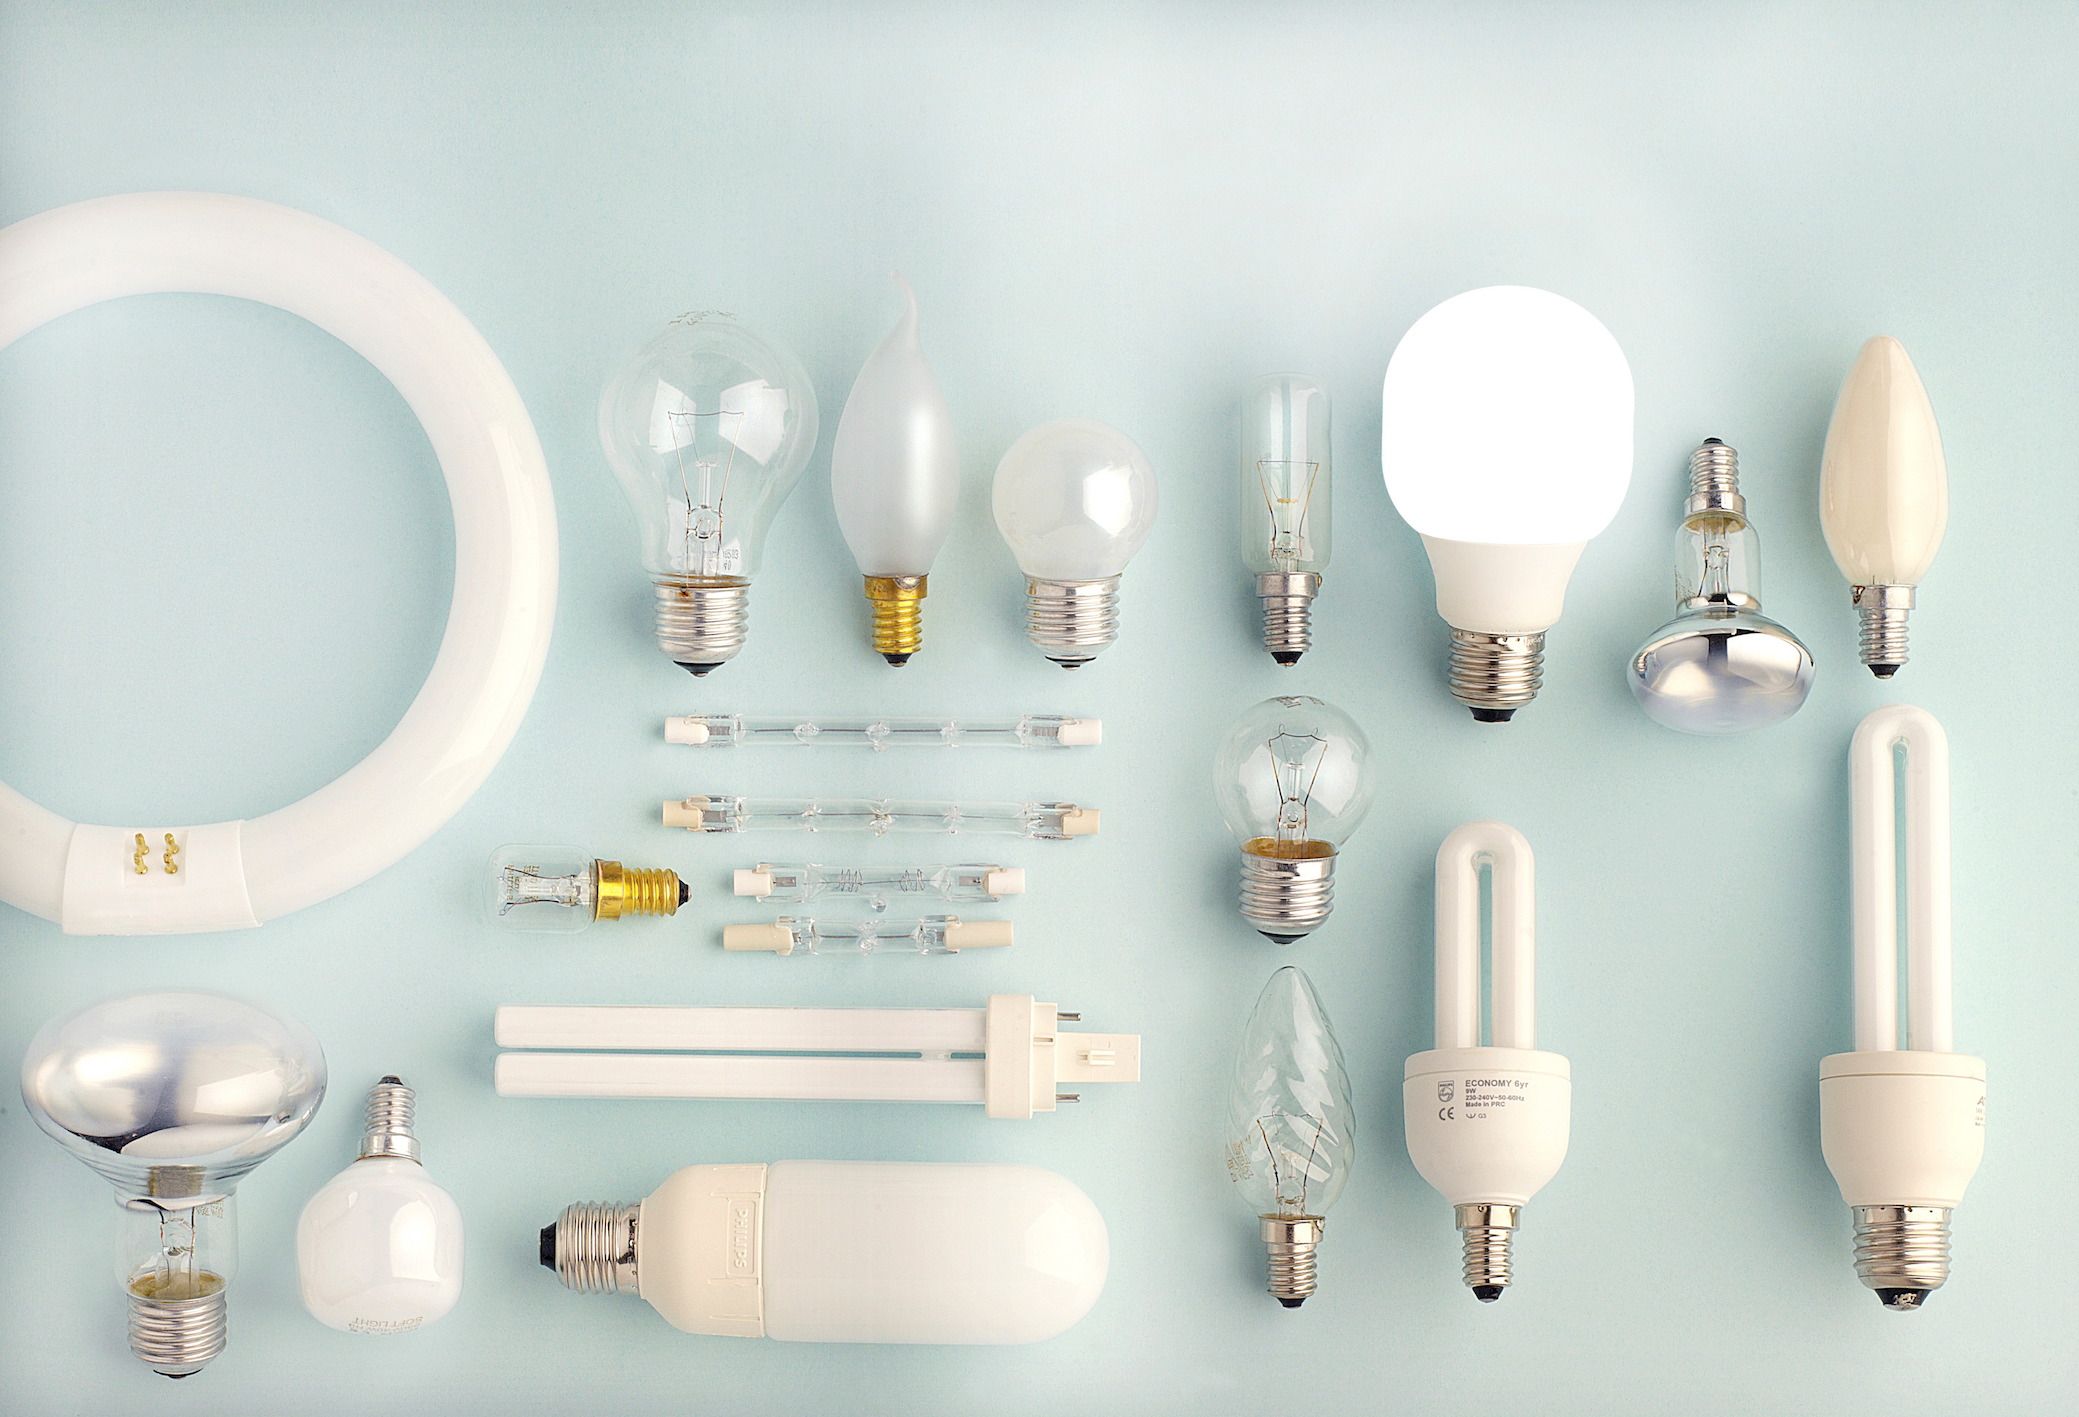 Different Types Of Light Bulbs - Guide To Buying Light Bulbs